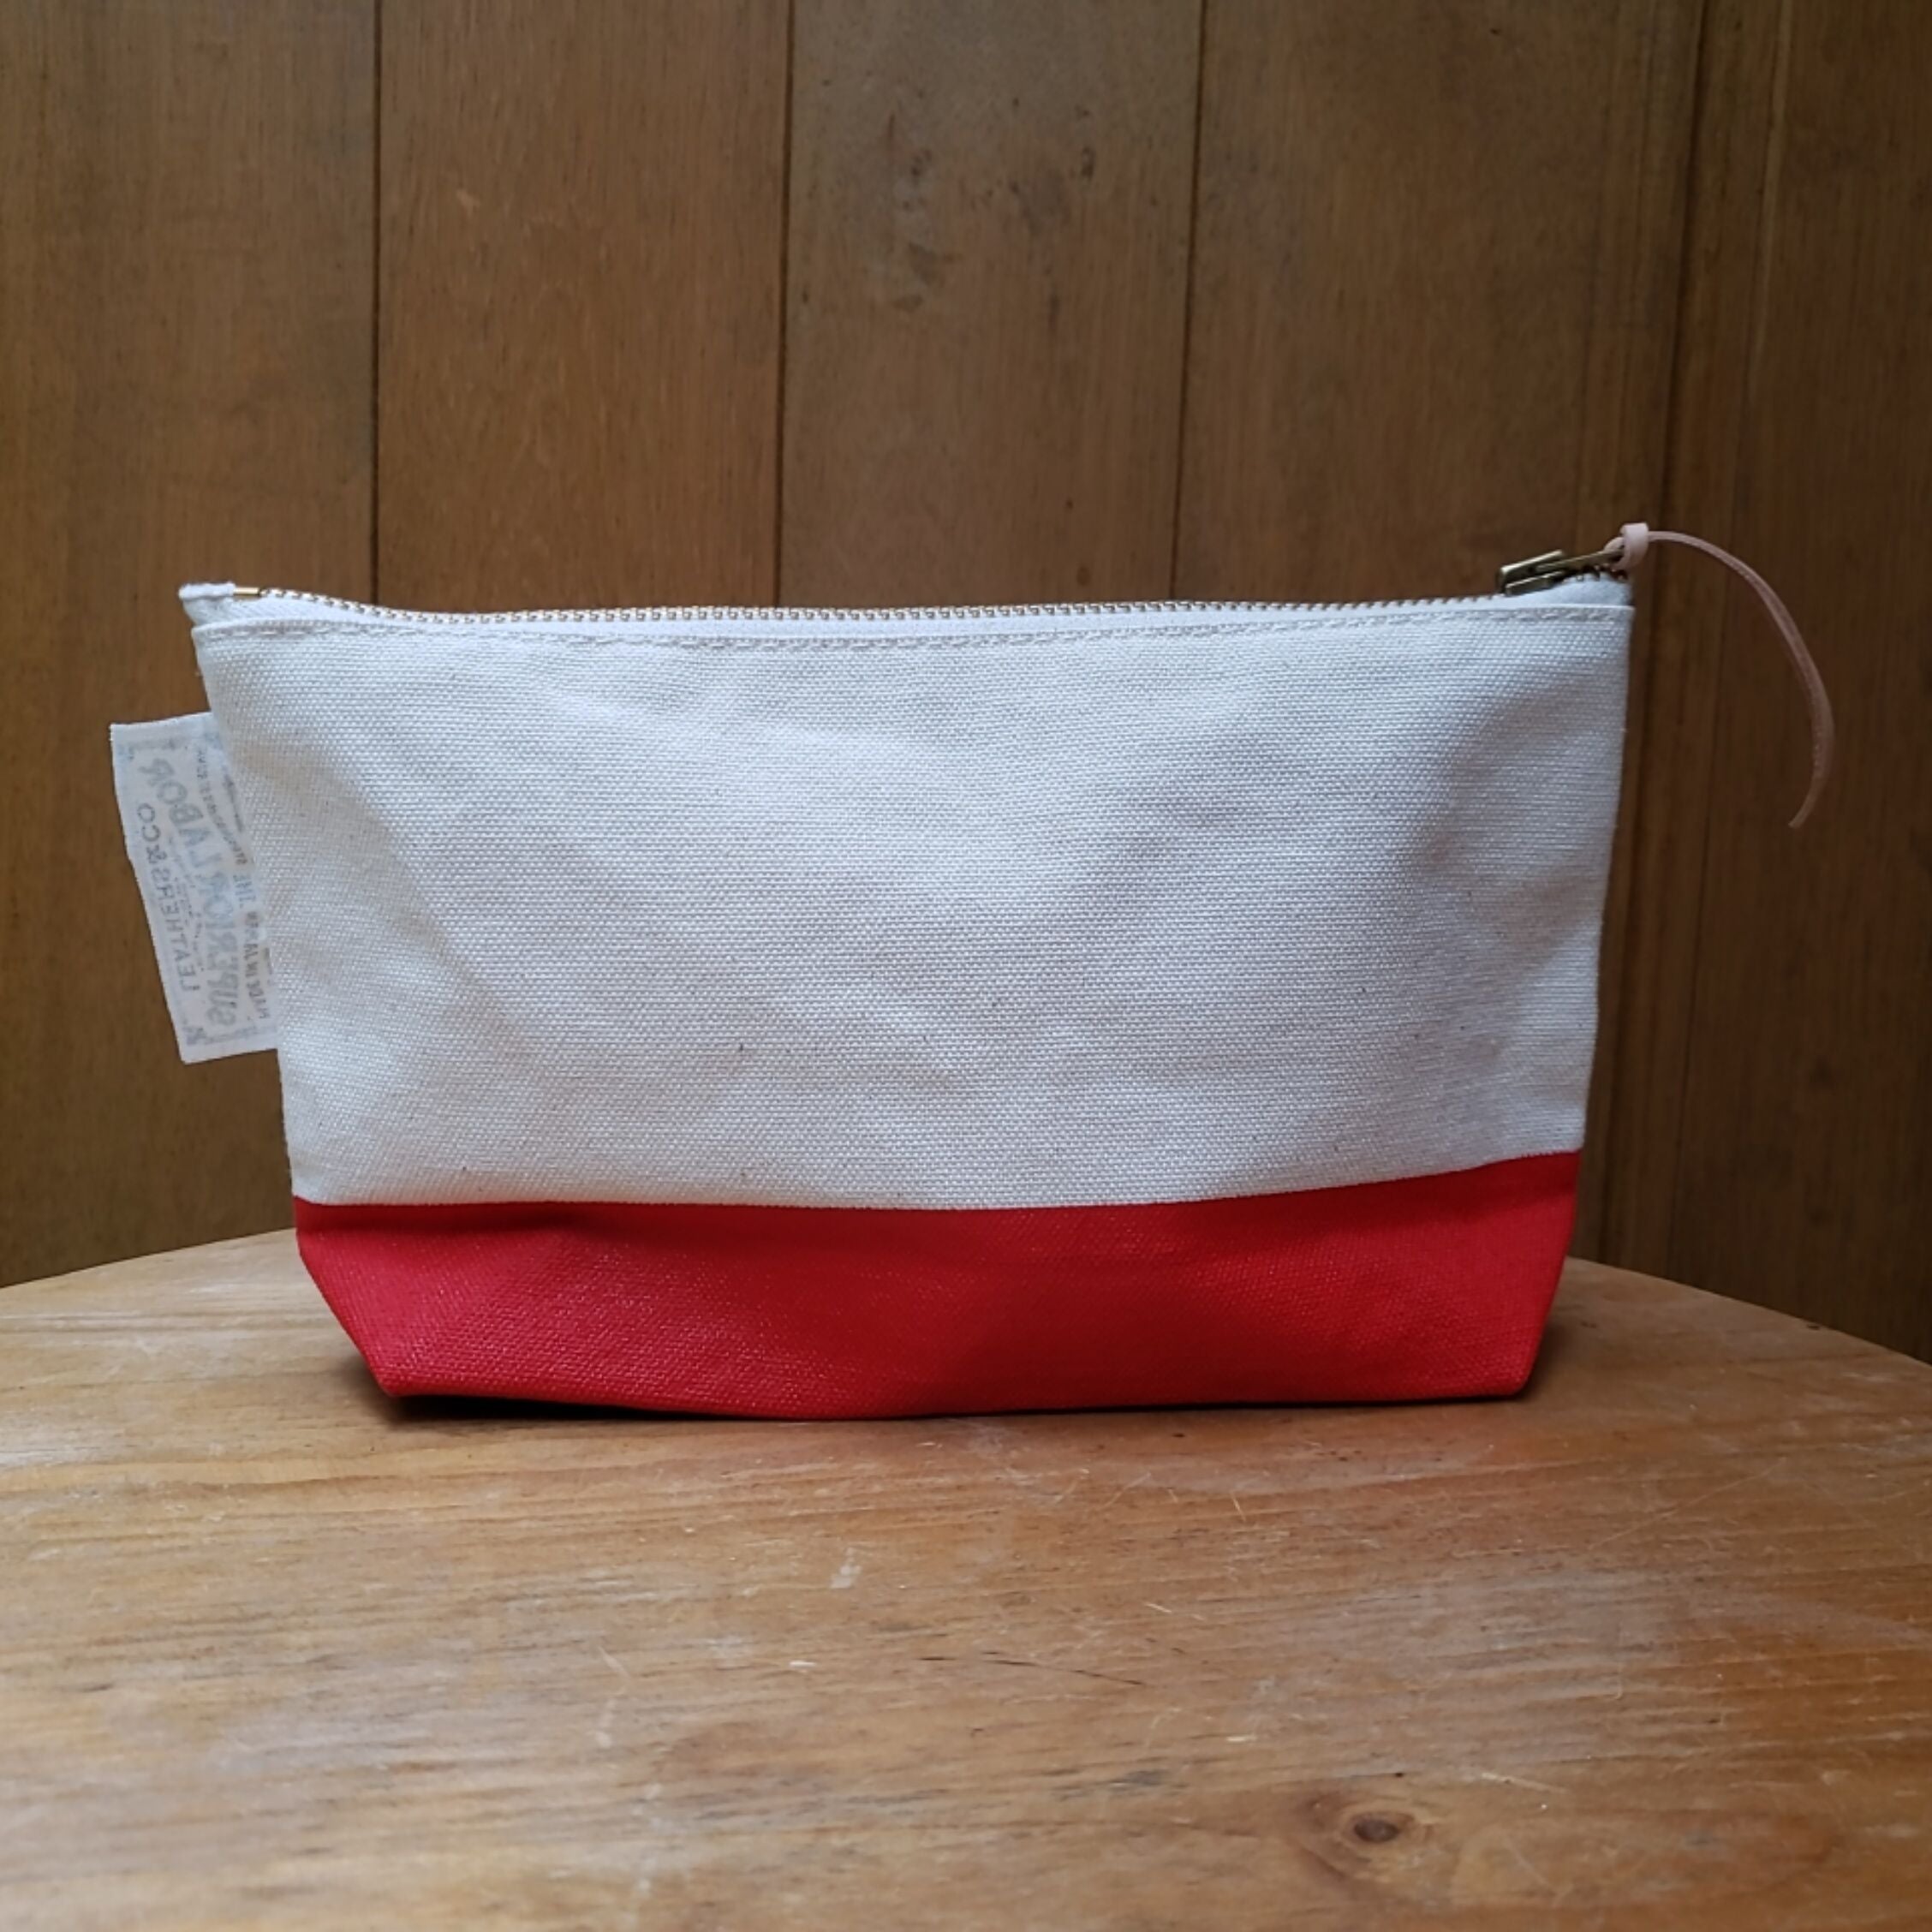 SL0103 engineer pouch #03